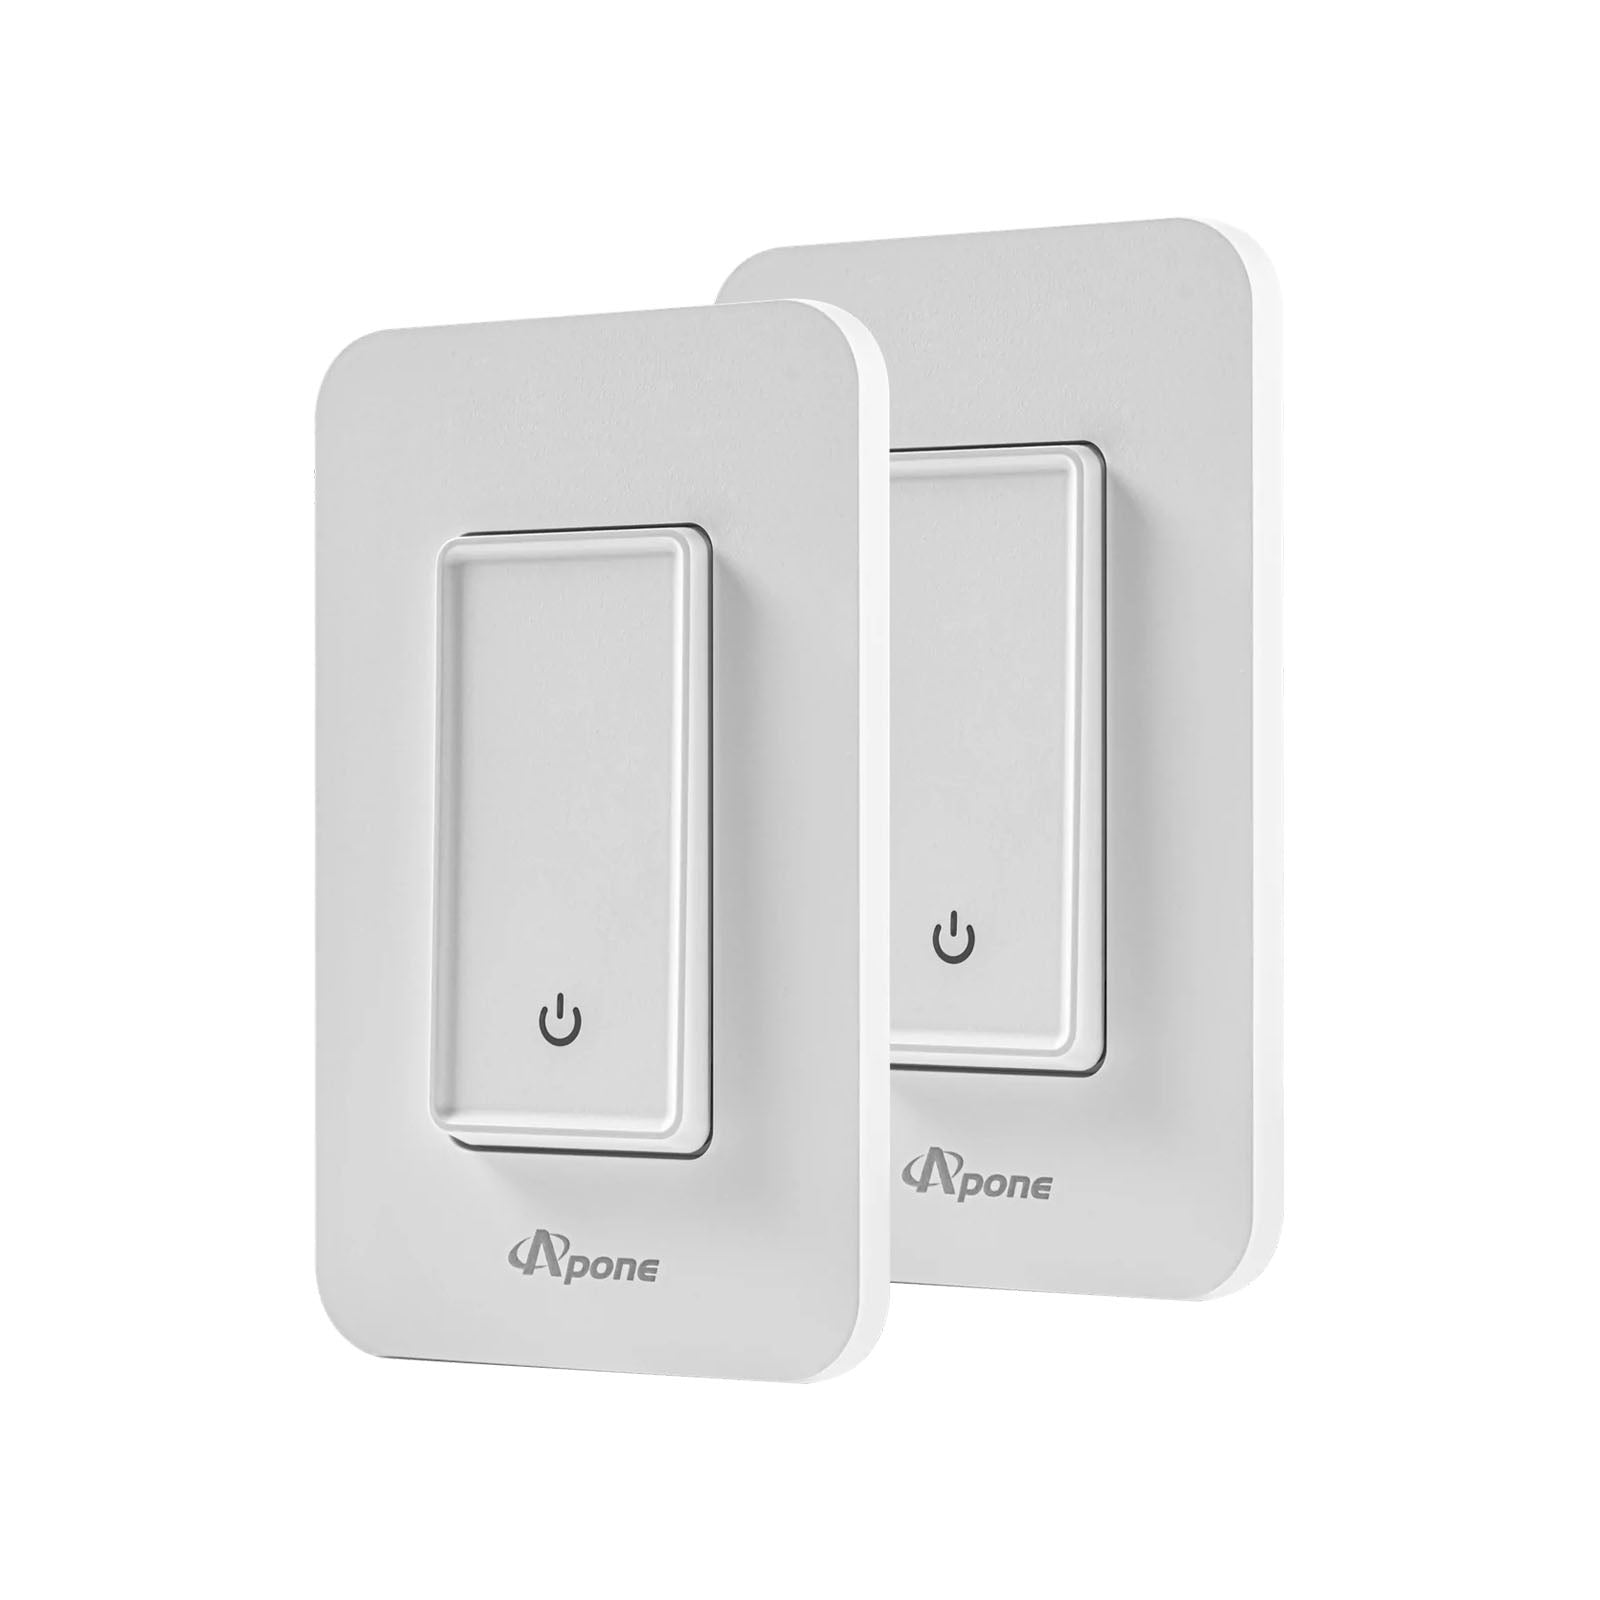 Apone 3-way Wi-Fi smart switch, Uses Apone Smart app, Works with Alexa and Google Home, Schedule, Timer, No Hub Required (2-5 pack)